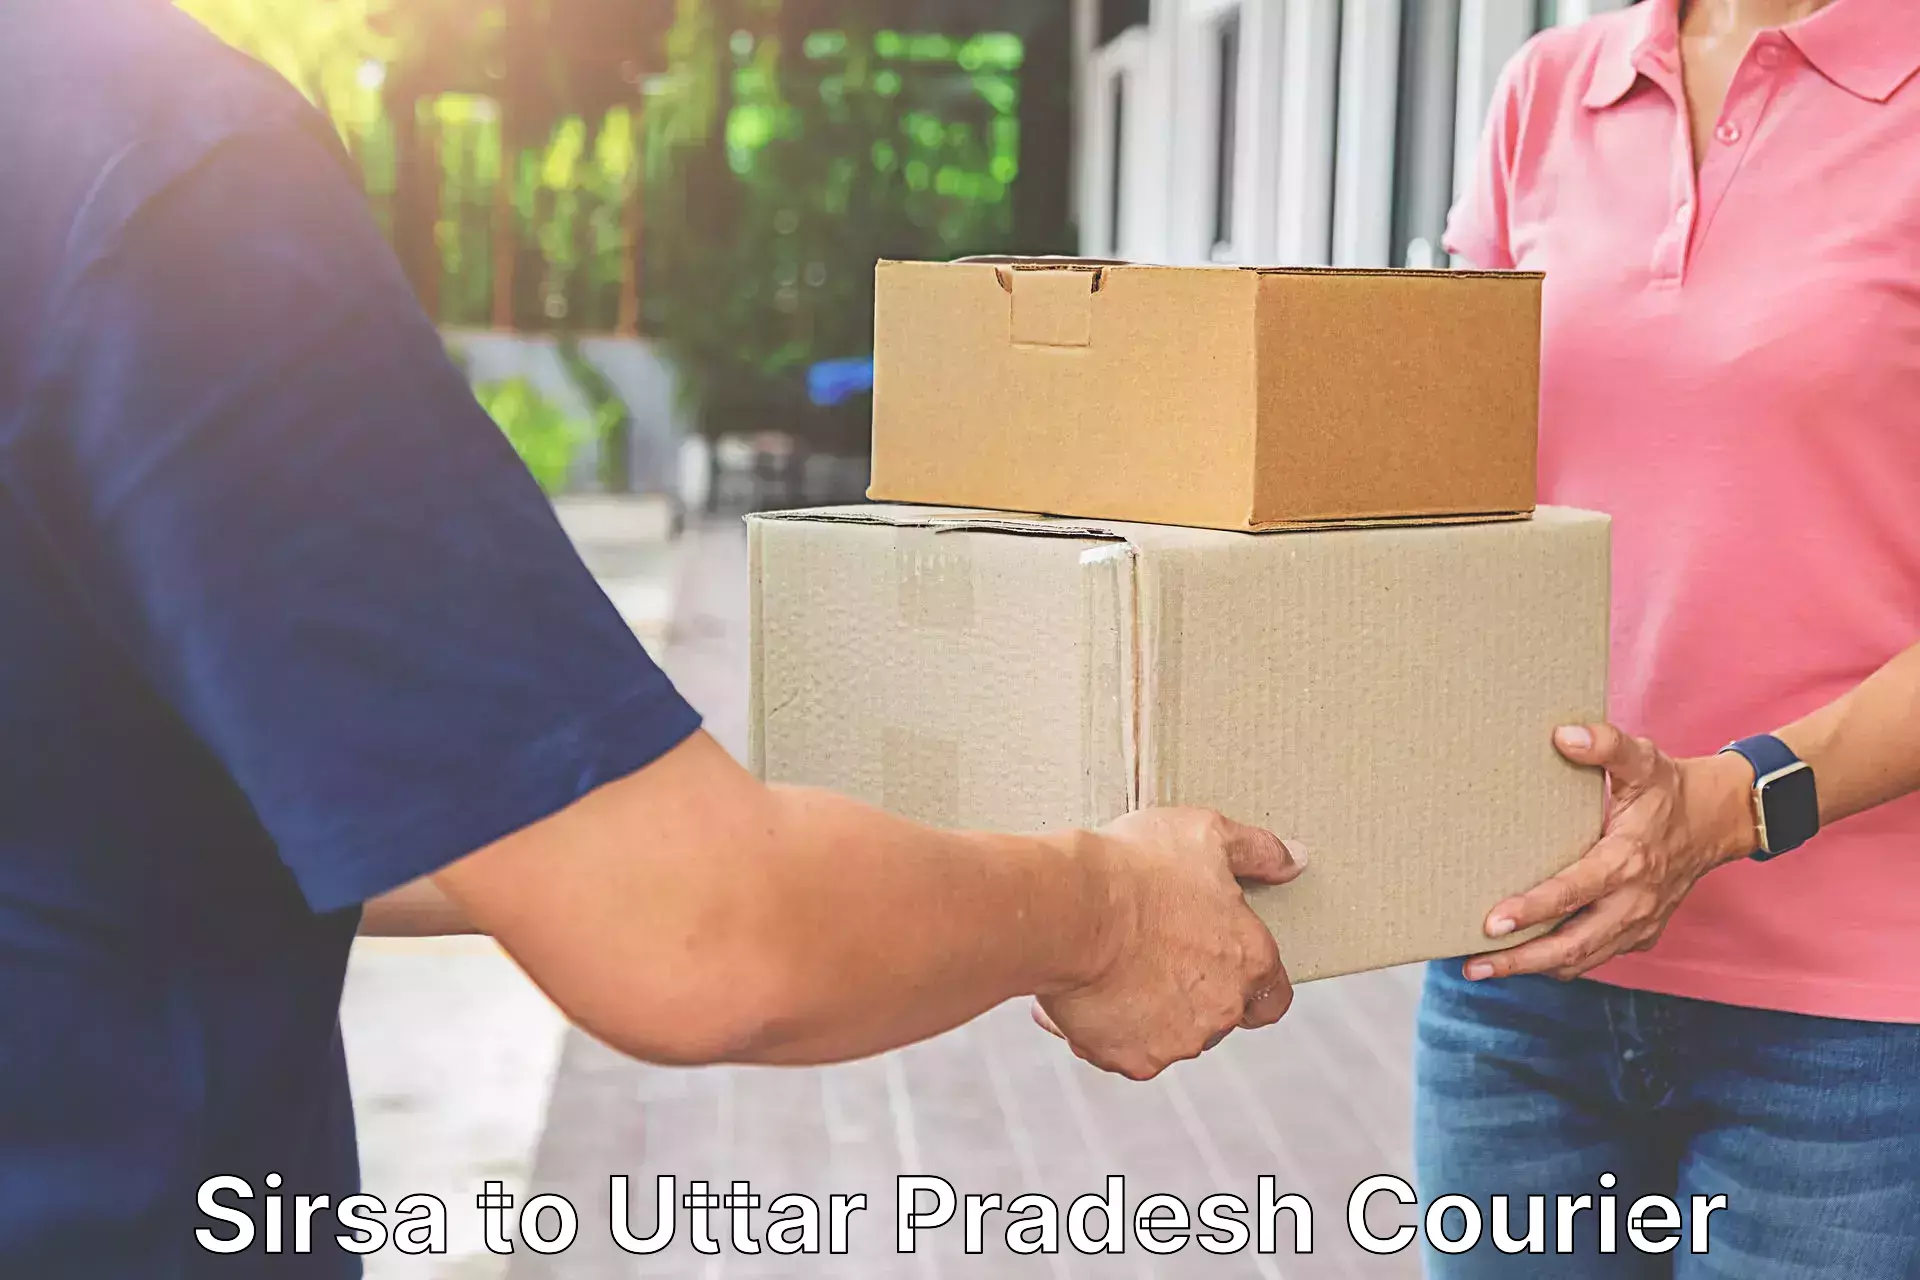 Same-day delivery solutions Sirsa to Saharanpur